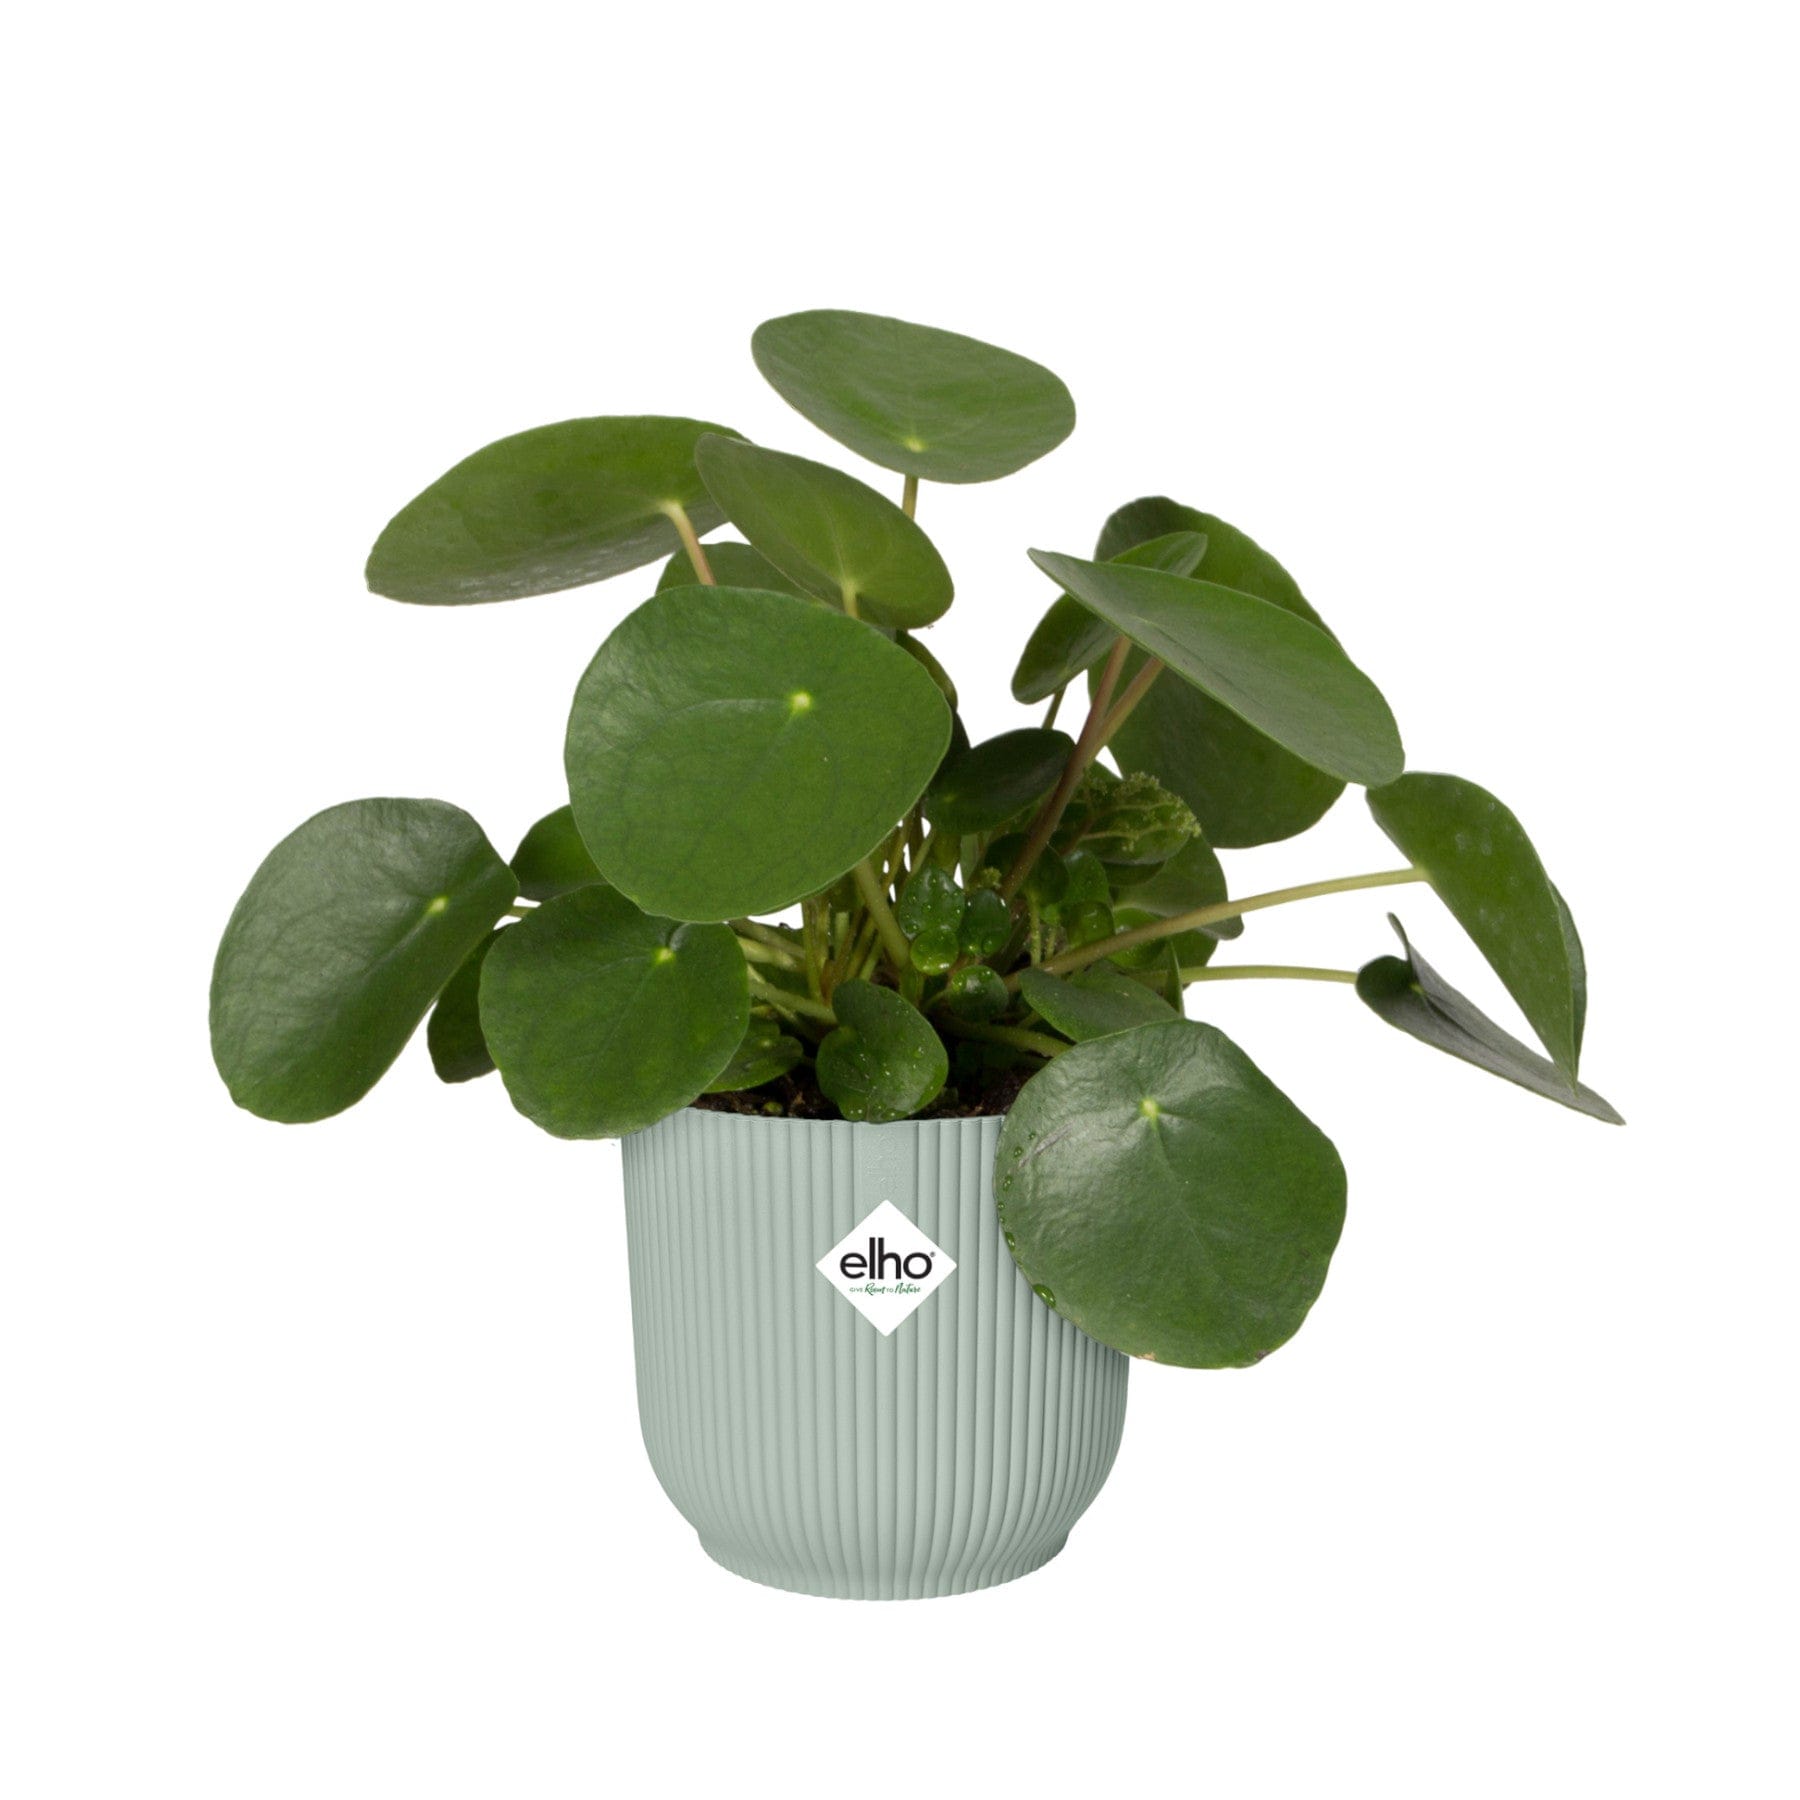 Pilea peperomioides, also known as Chinese money plant, in a light grey ribbed Elho plant pot on a white background.